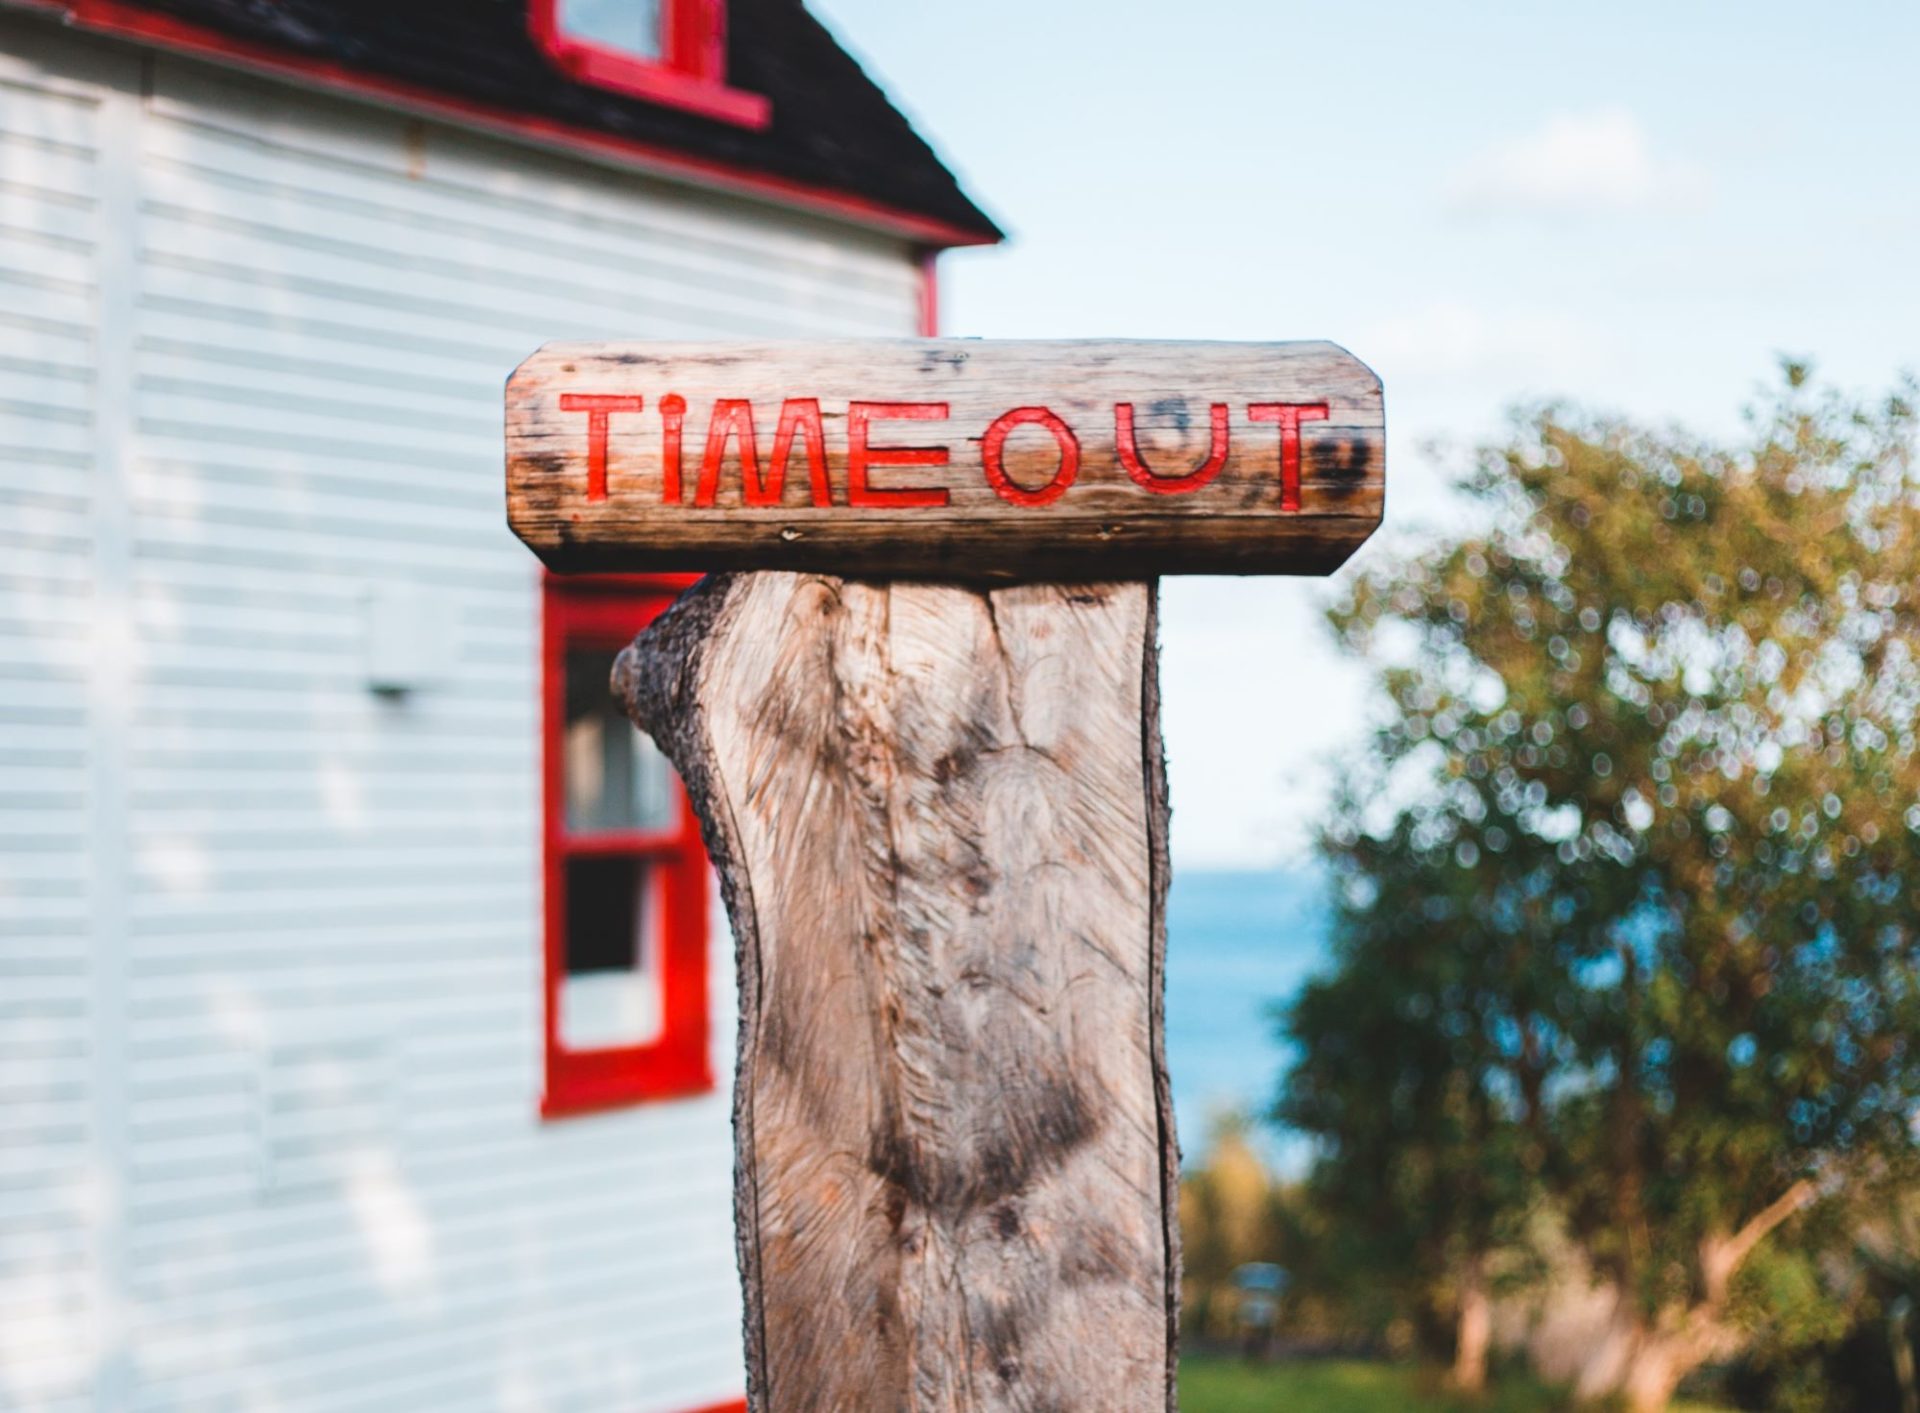 A log, cut in half standing vertically with a wood sign that has the words Time Out carved in it, painted red. It sits in front of a house with white siding and red window frames.